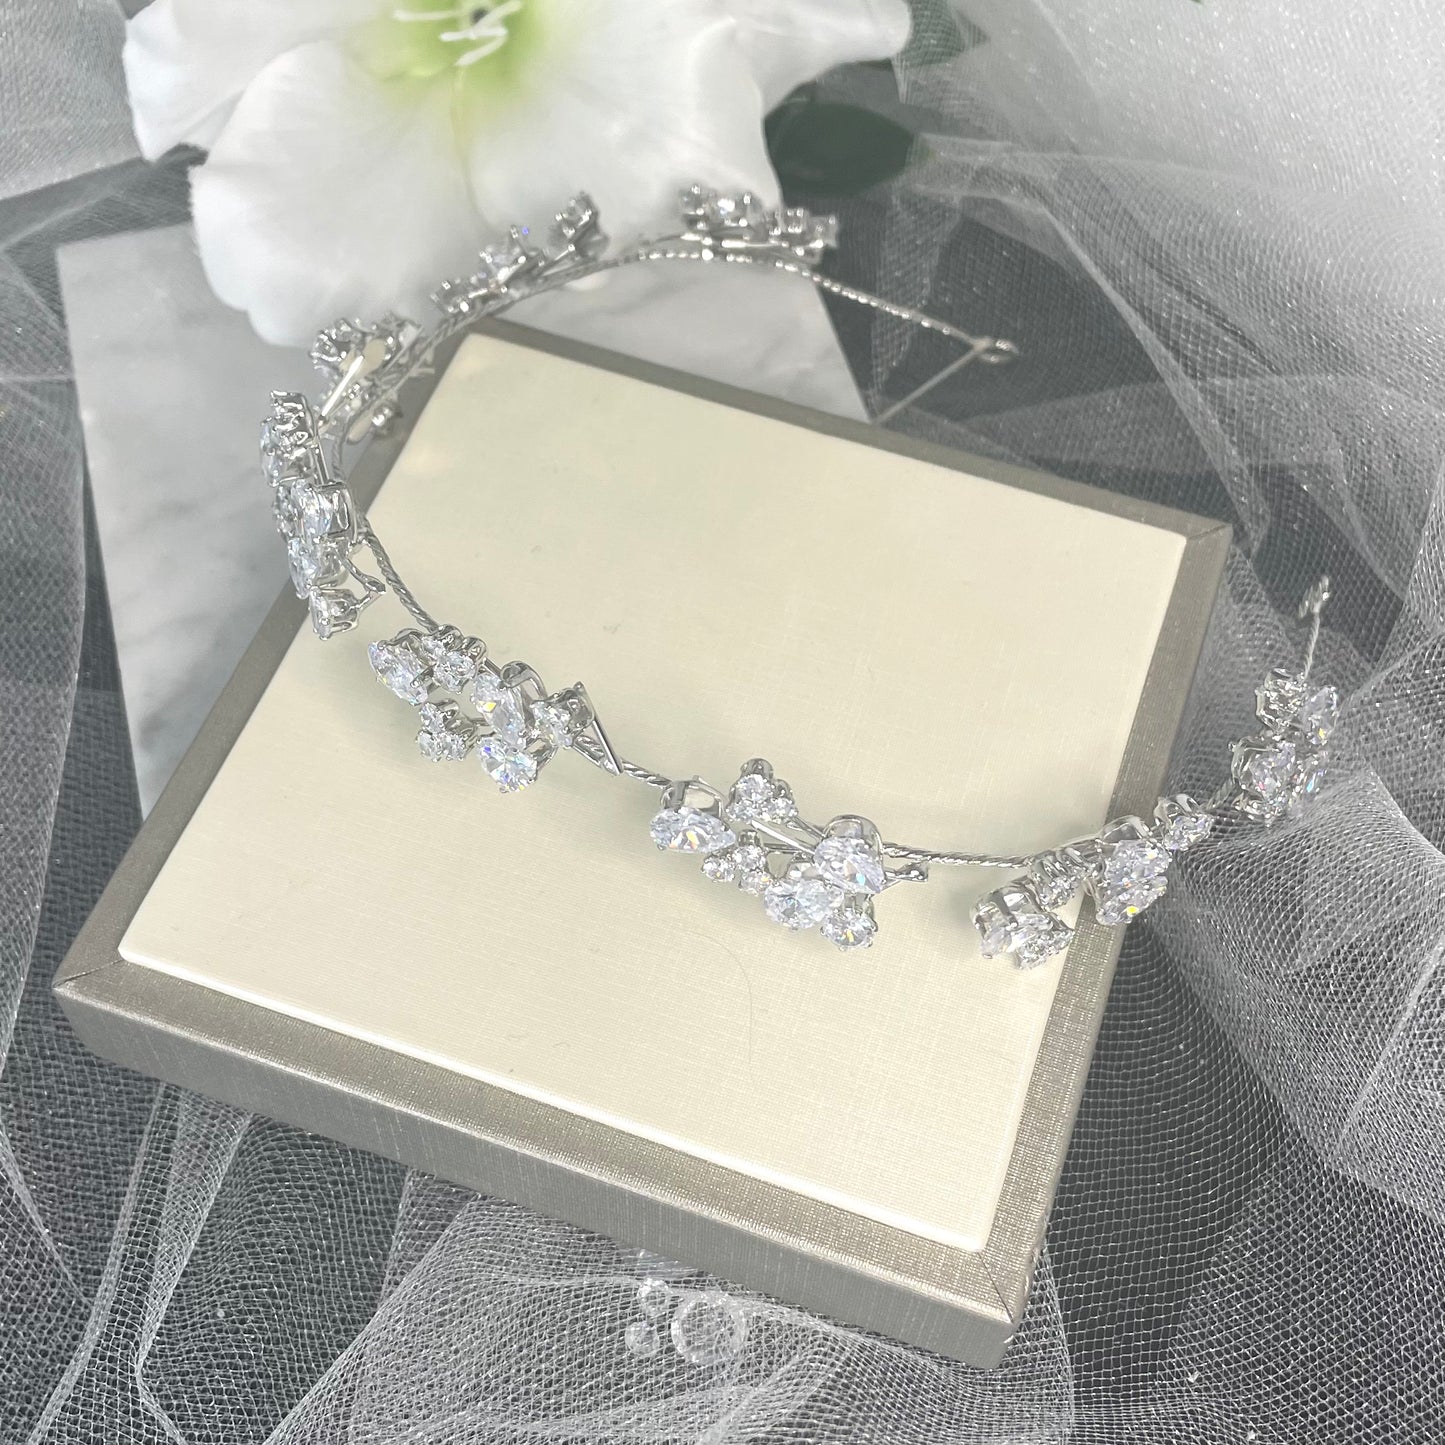 Stunning Teia Bridal Wedding Hairband with handmade silver leaves and twinkling solitaire crystals, perfect for adding a sophisticated floral touch to bridal hairstyles.